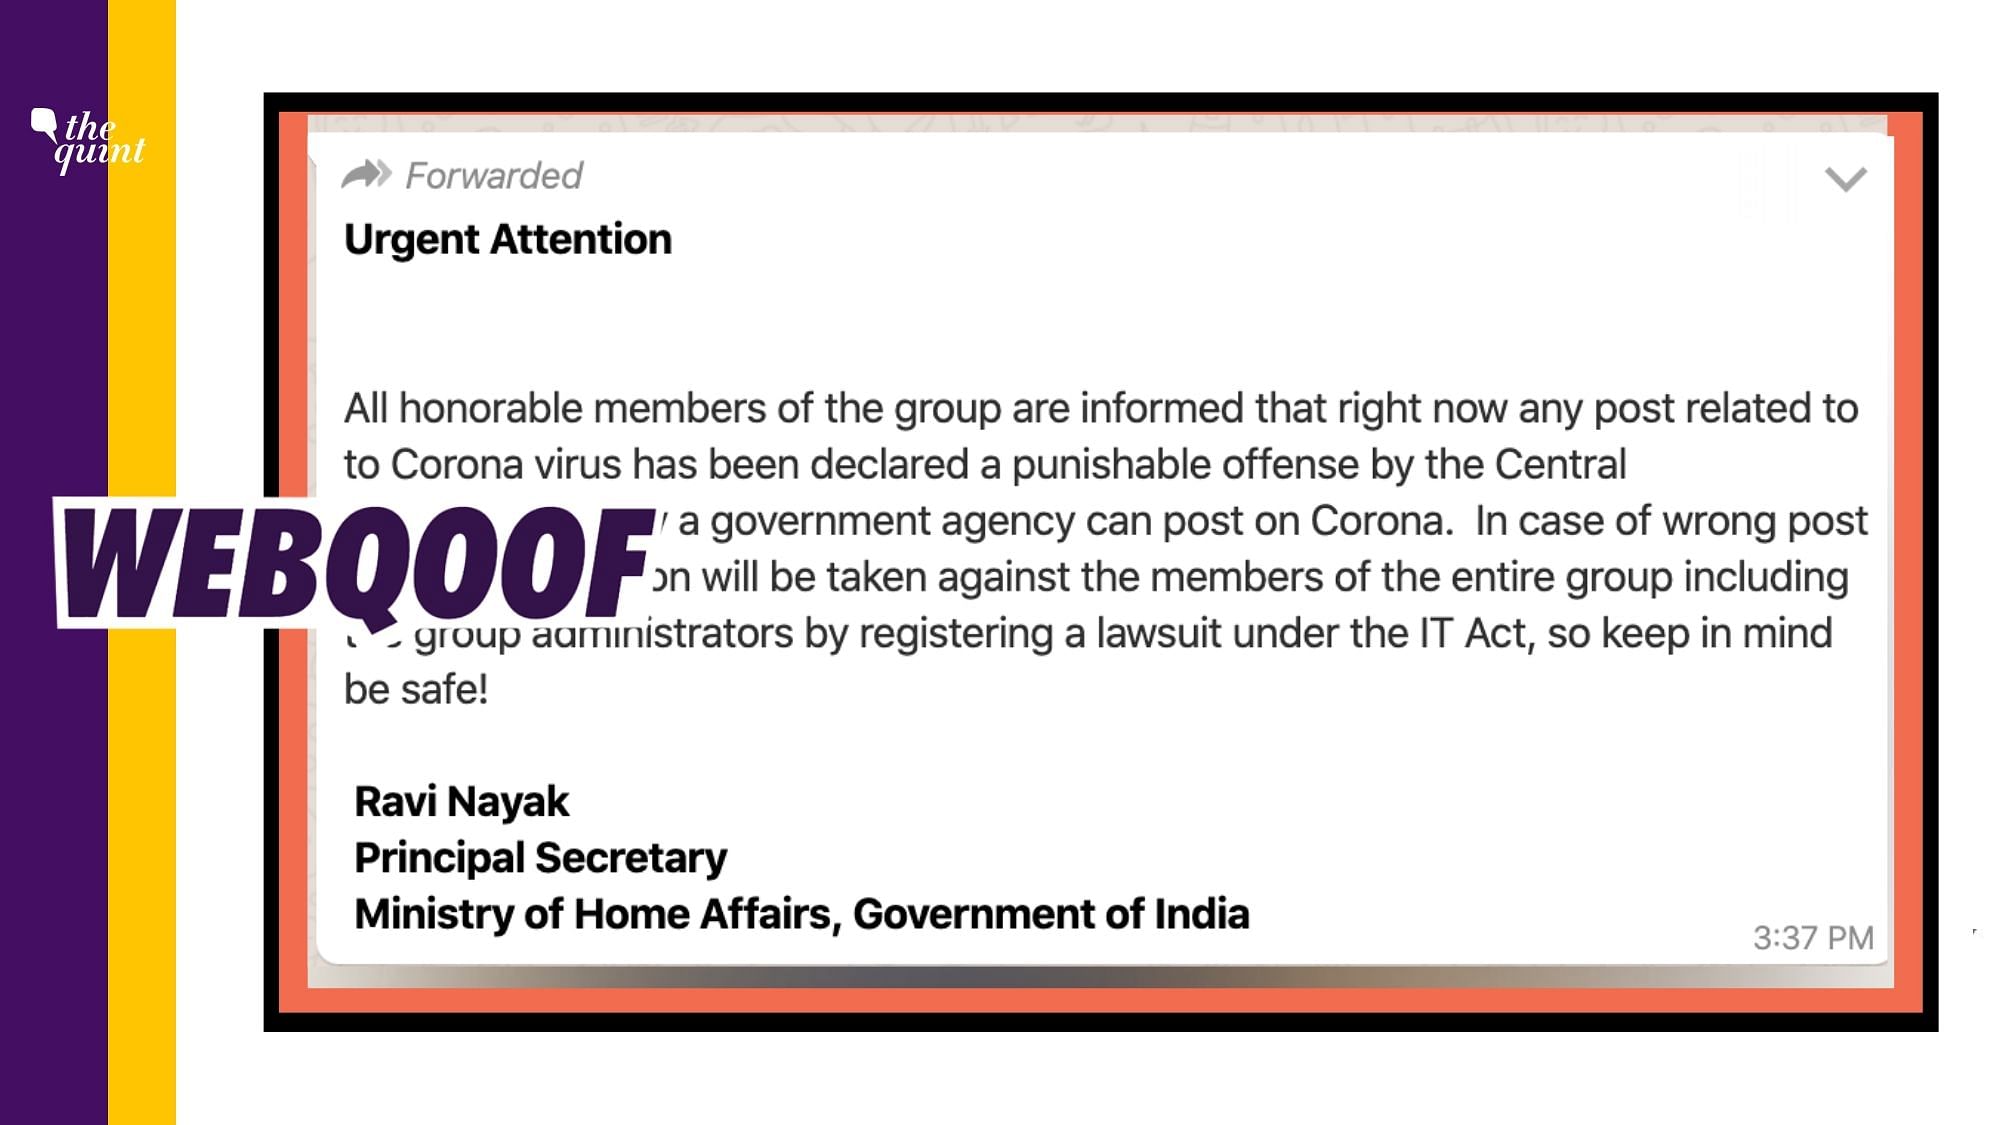 There is no person with the name ‘Ravi Nayak’ neither is there a designation called Principal Secretary in MHA.